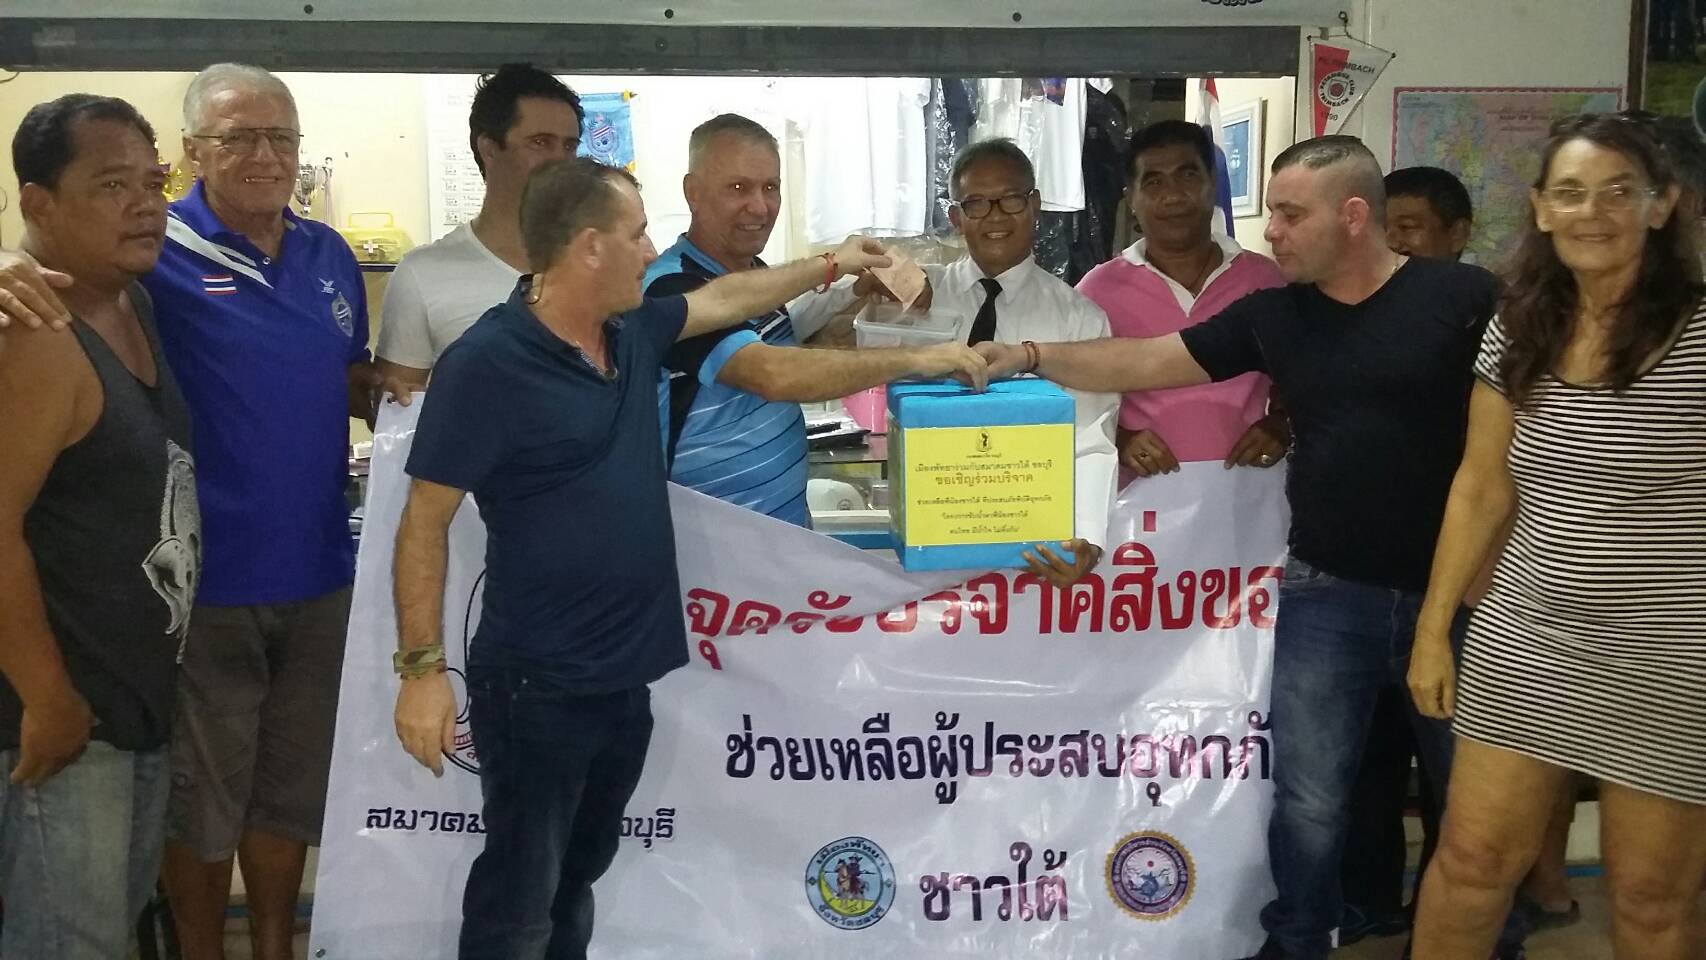 The Rose Cup Petanque Club donated cash and necessities to help flood victims in Thailand’s South.